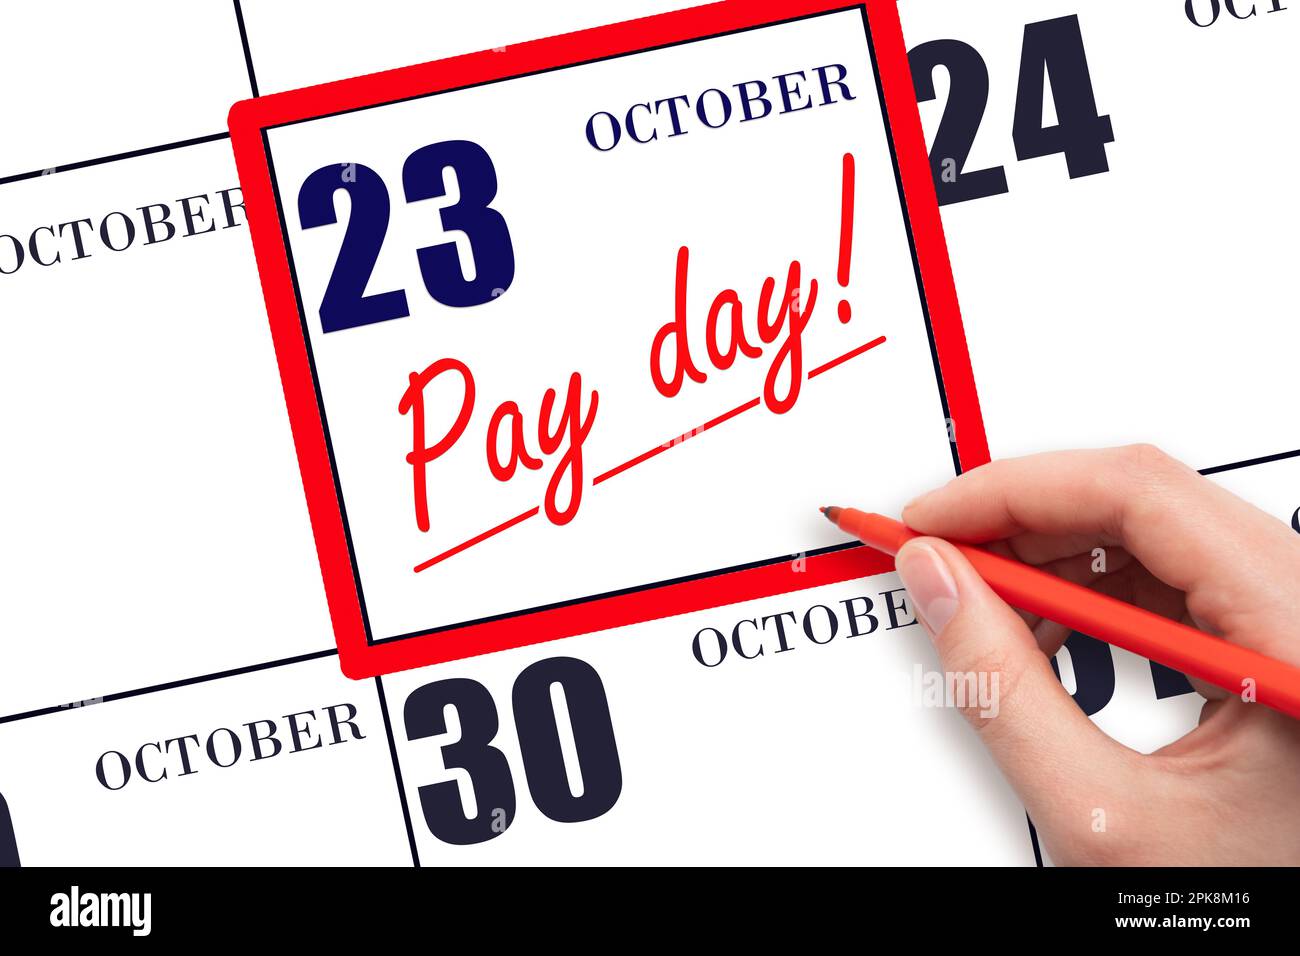 23rd day of October. Hand writing text PAY DATE on calendar date October 23 and underline it. Payment due date. Reminder concept of payment. Autumn mo Stock Photo